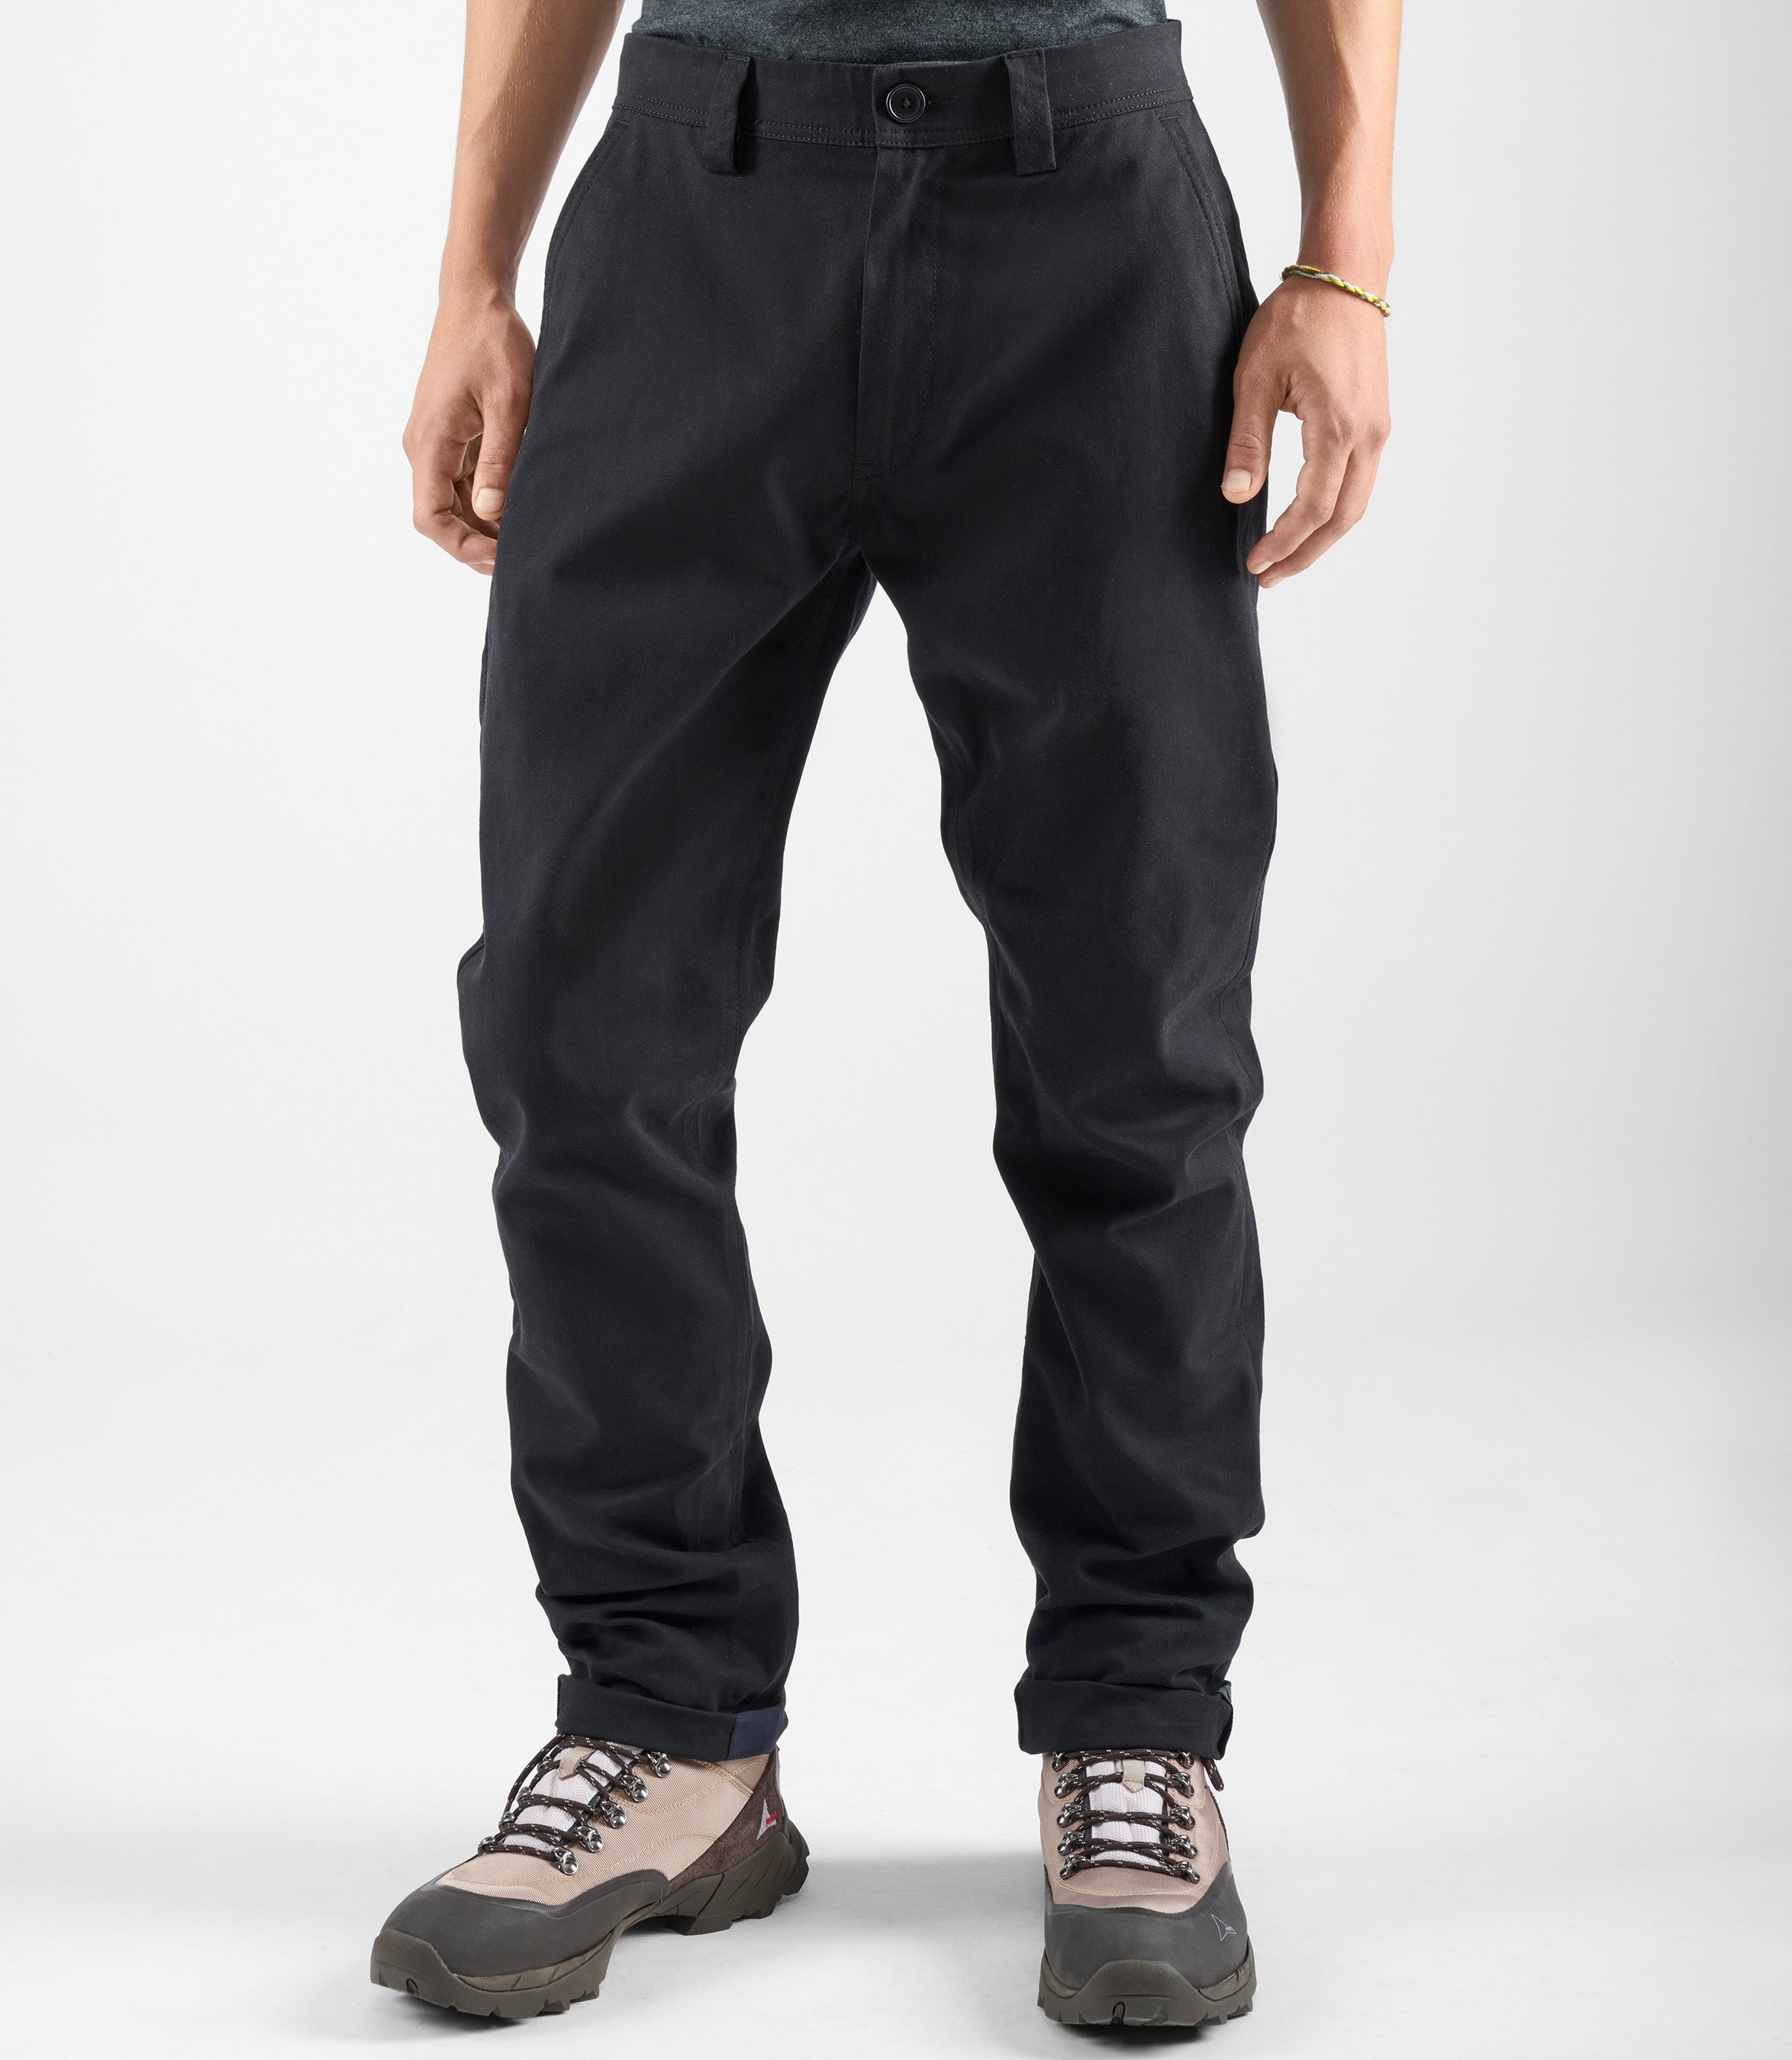 24WCCUR00PE_8_men cycling chino black urban front full pedaled